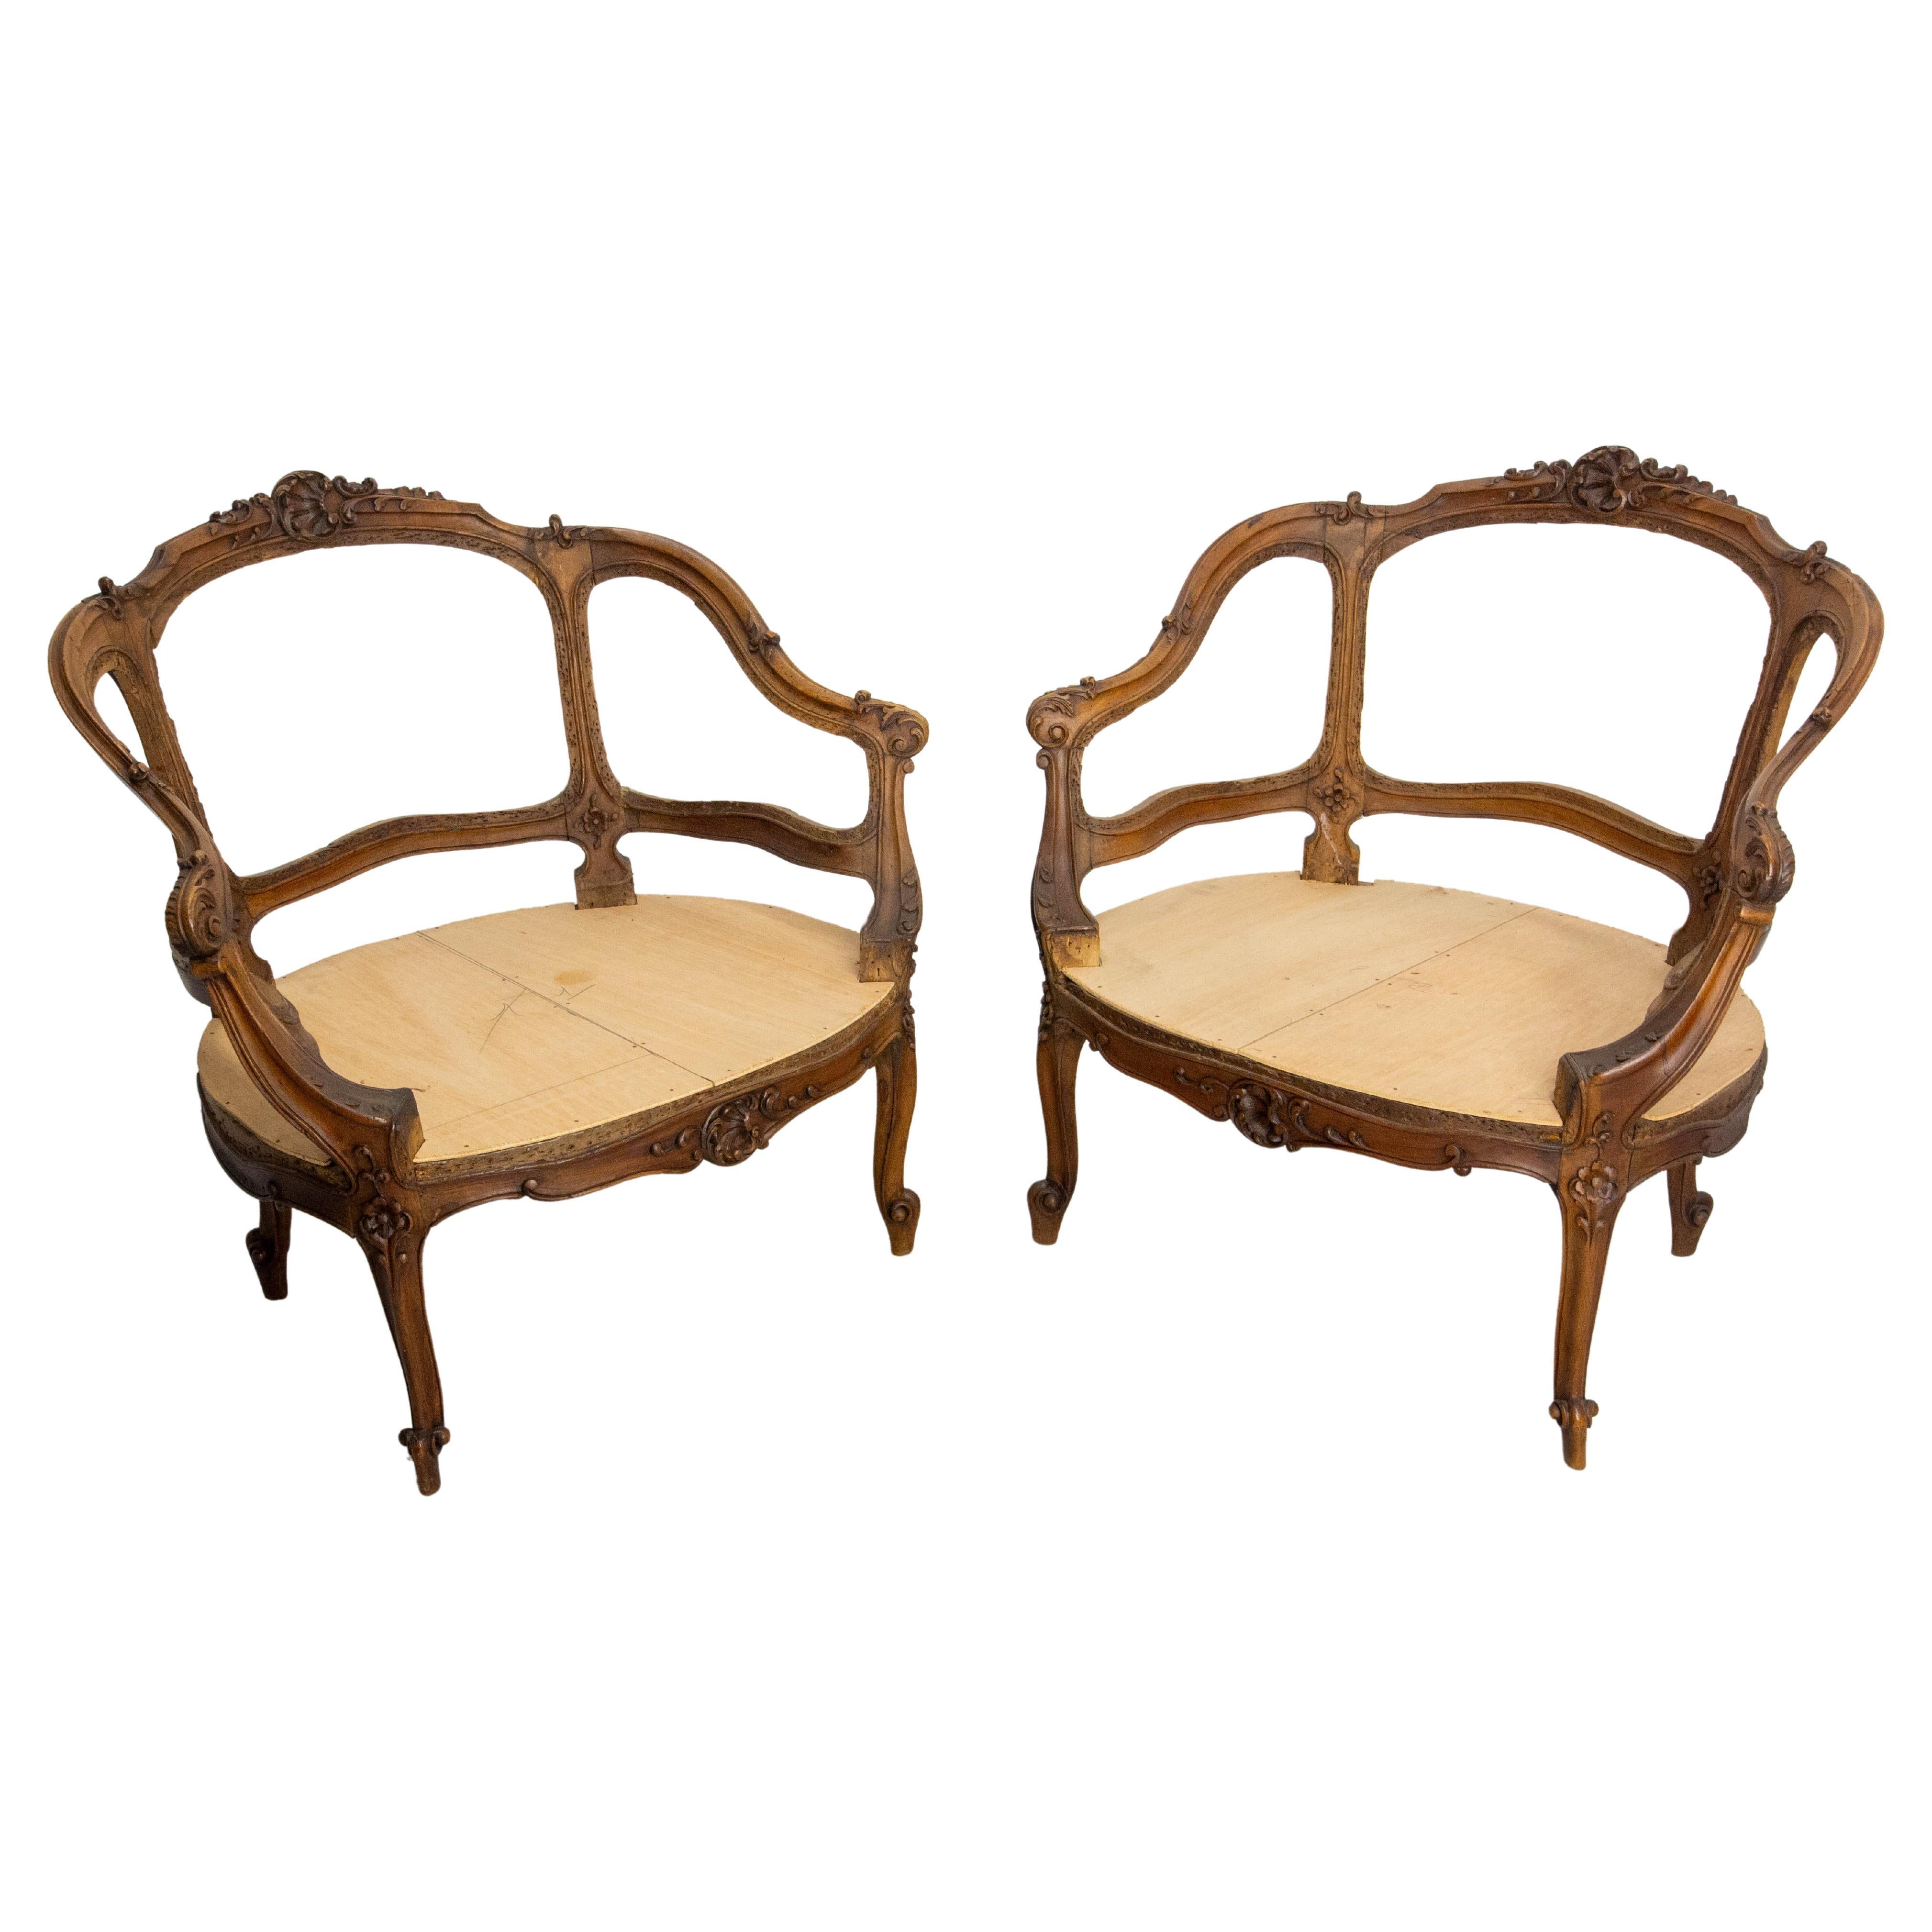 Pair of Louis XV Revival Open Armchairs to Cane or Upholster French, 19th C